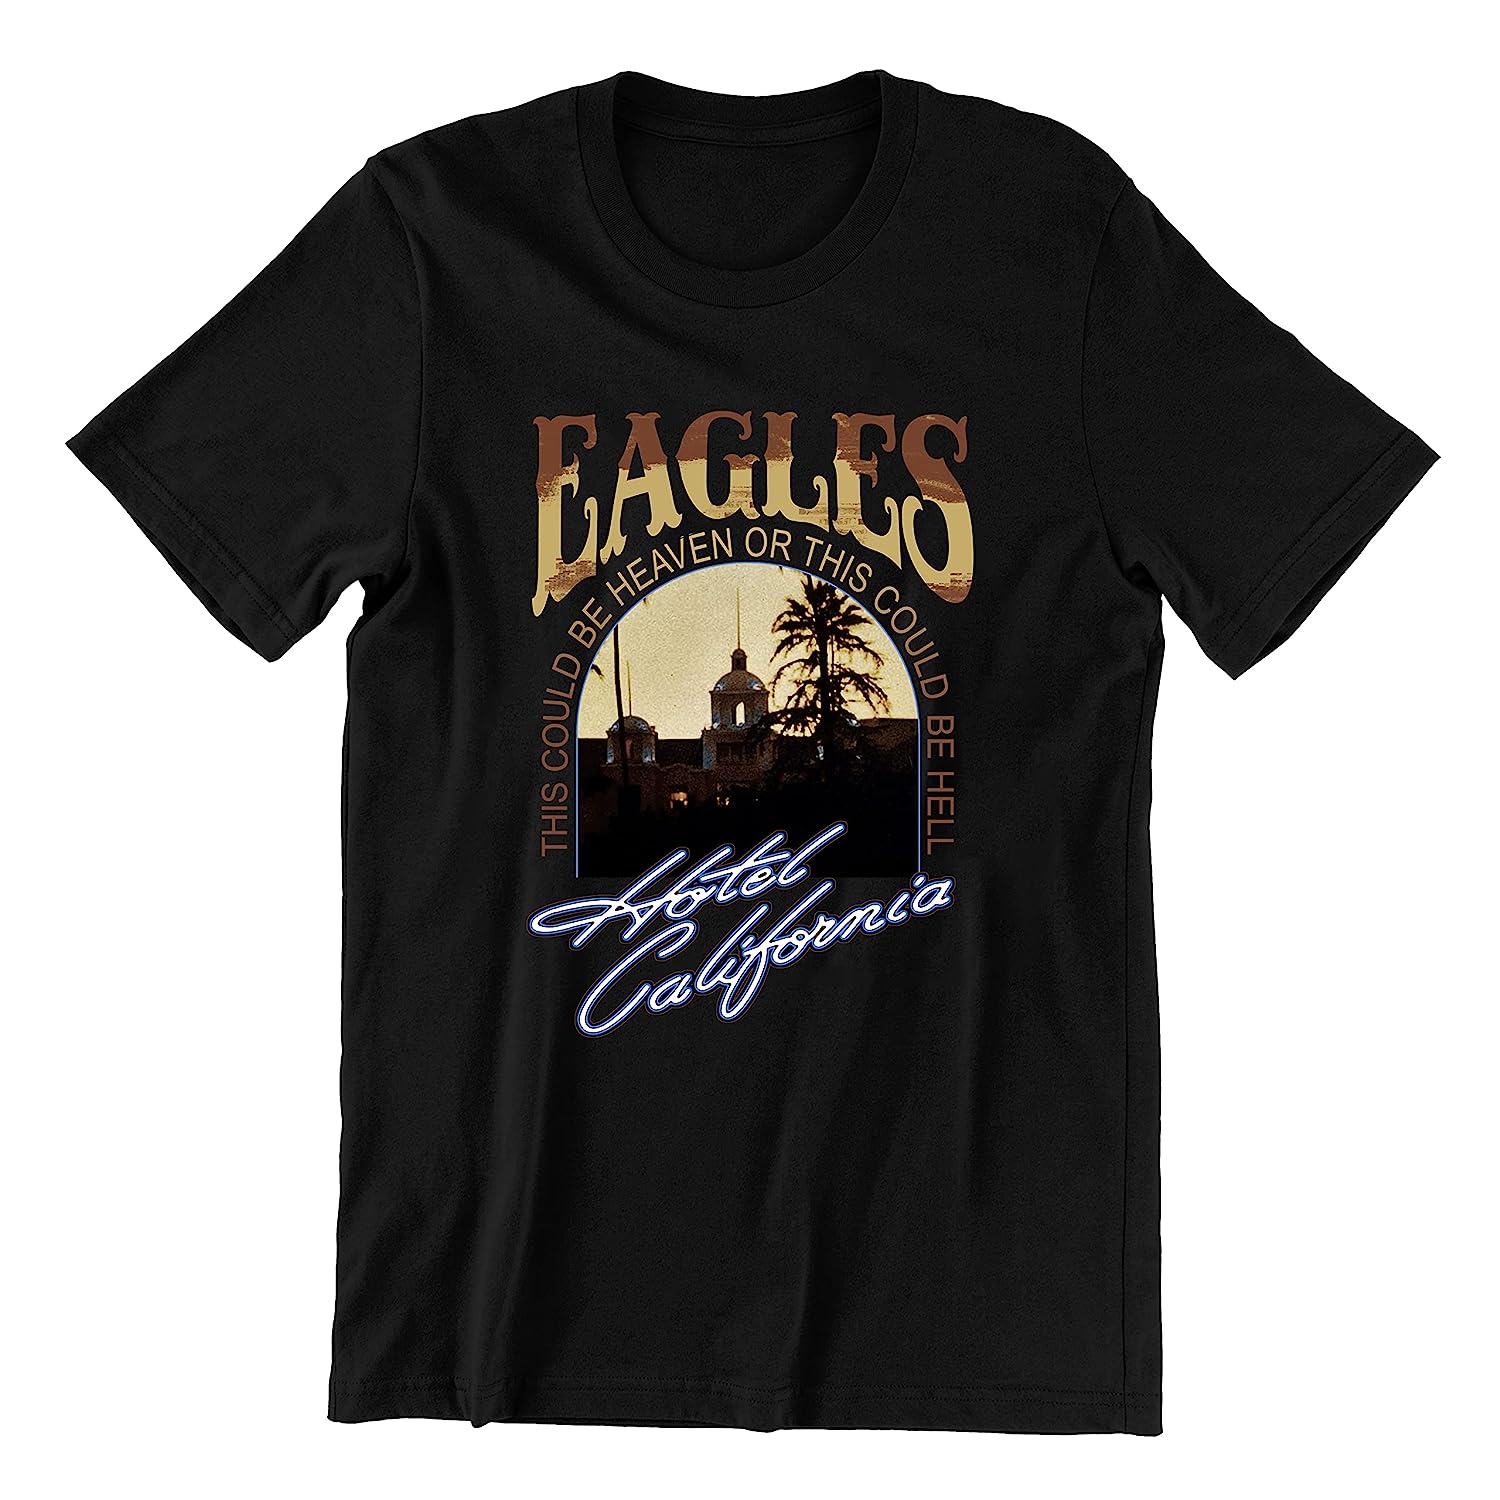 This Could Be Heaven Or This Could Be Hell Tshirt, Hotel California Tshirt, Tshirt For Fans Of Eagles, 2023 Music Tour Tshirt, Hoodie, Sweatshirt, Tank Tops fullsize for men women